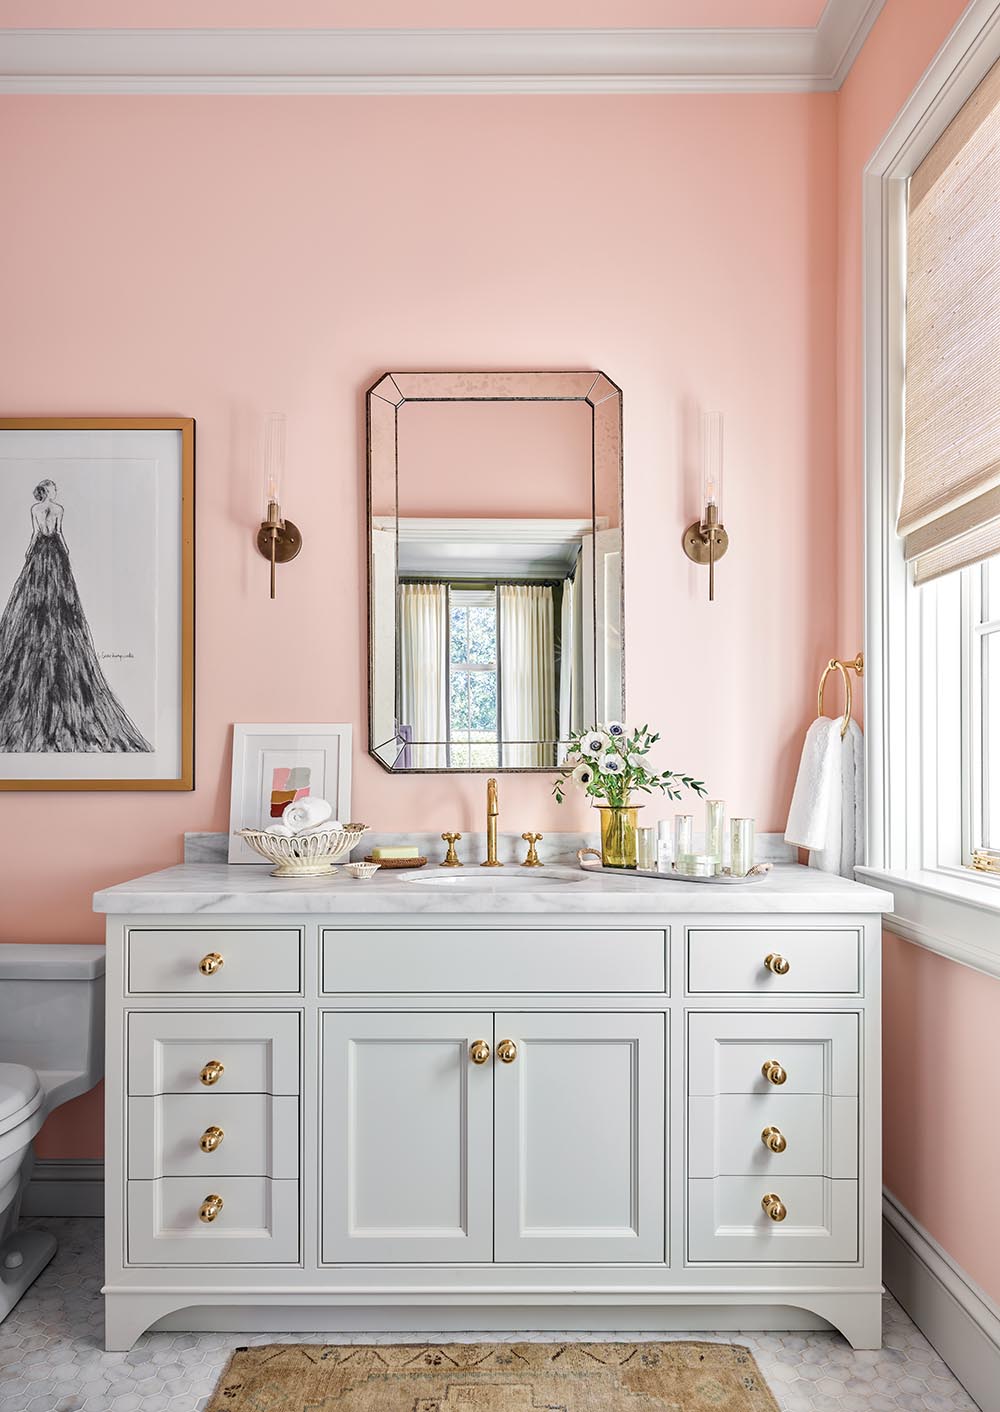 Bathroom sink and cabinet with pink walls in room designed by Tammy Connor